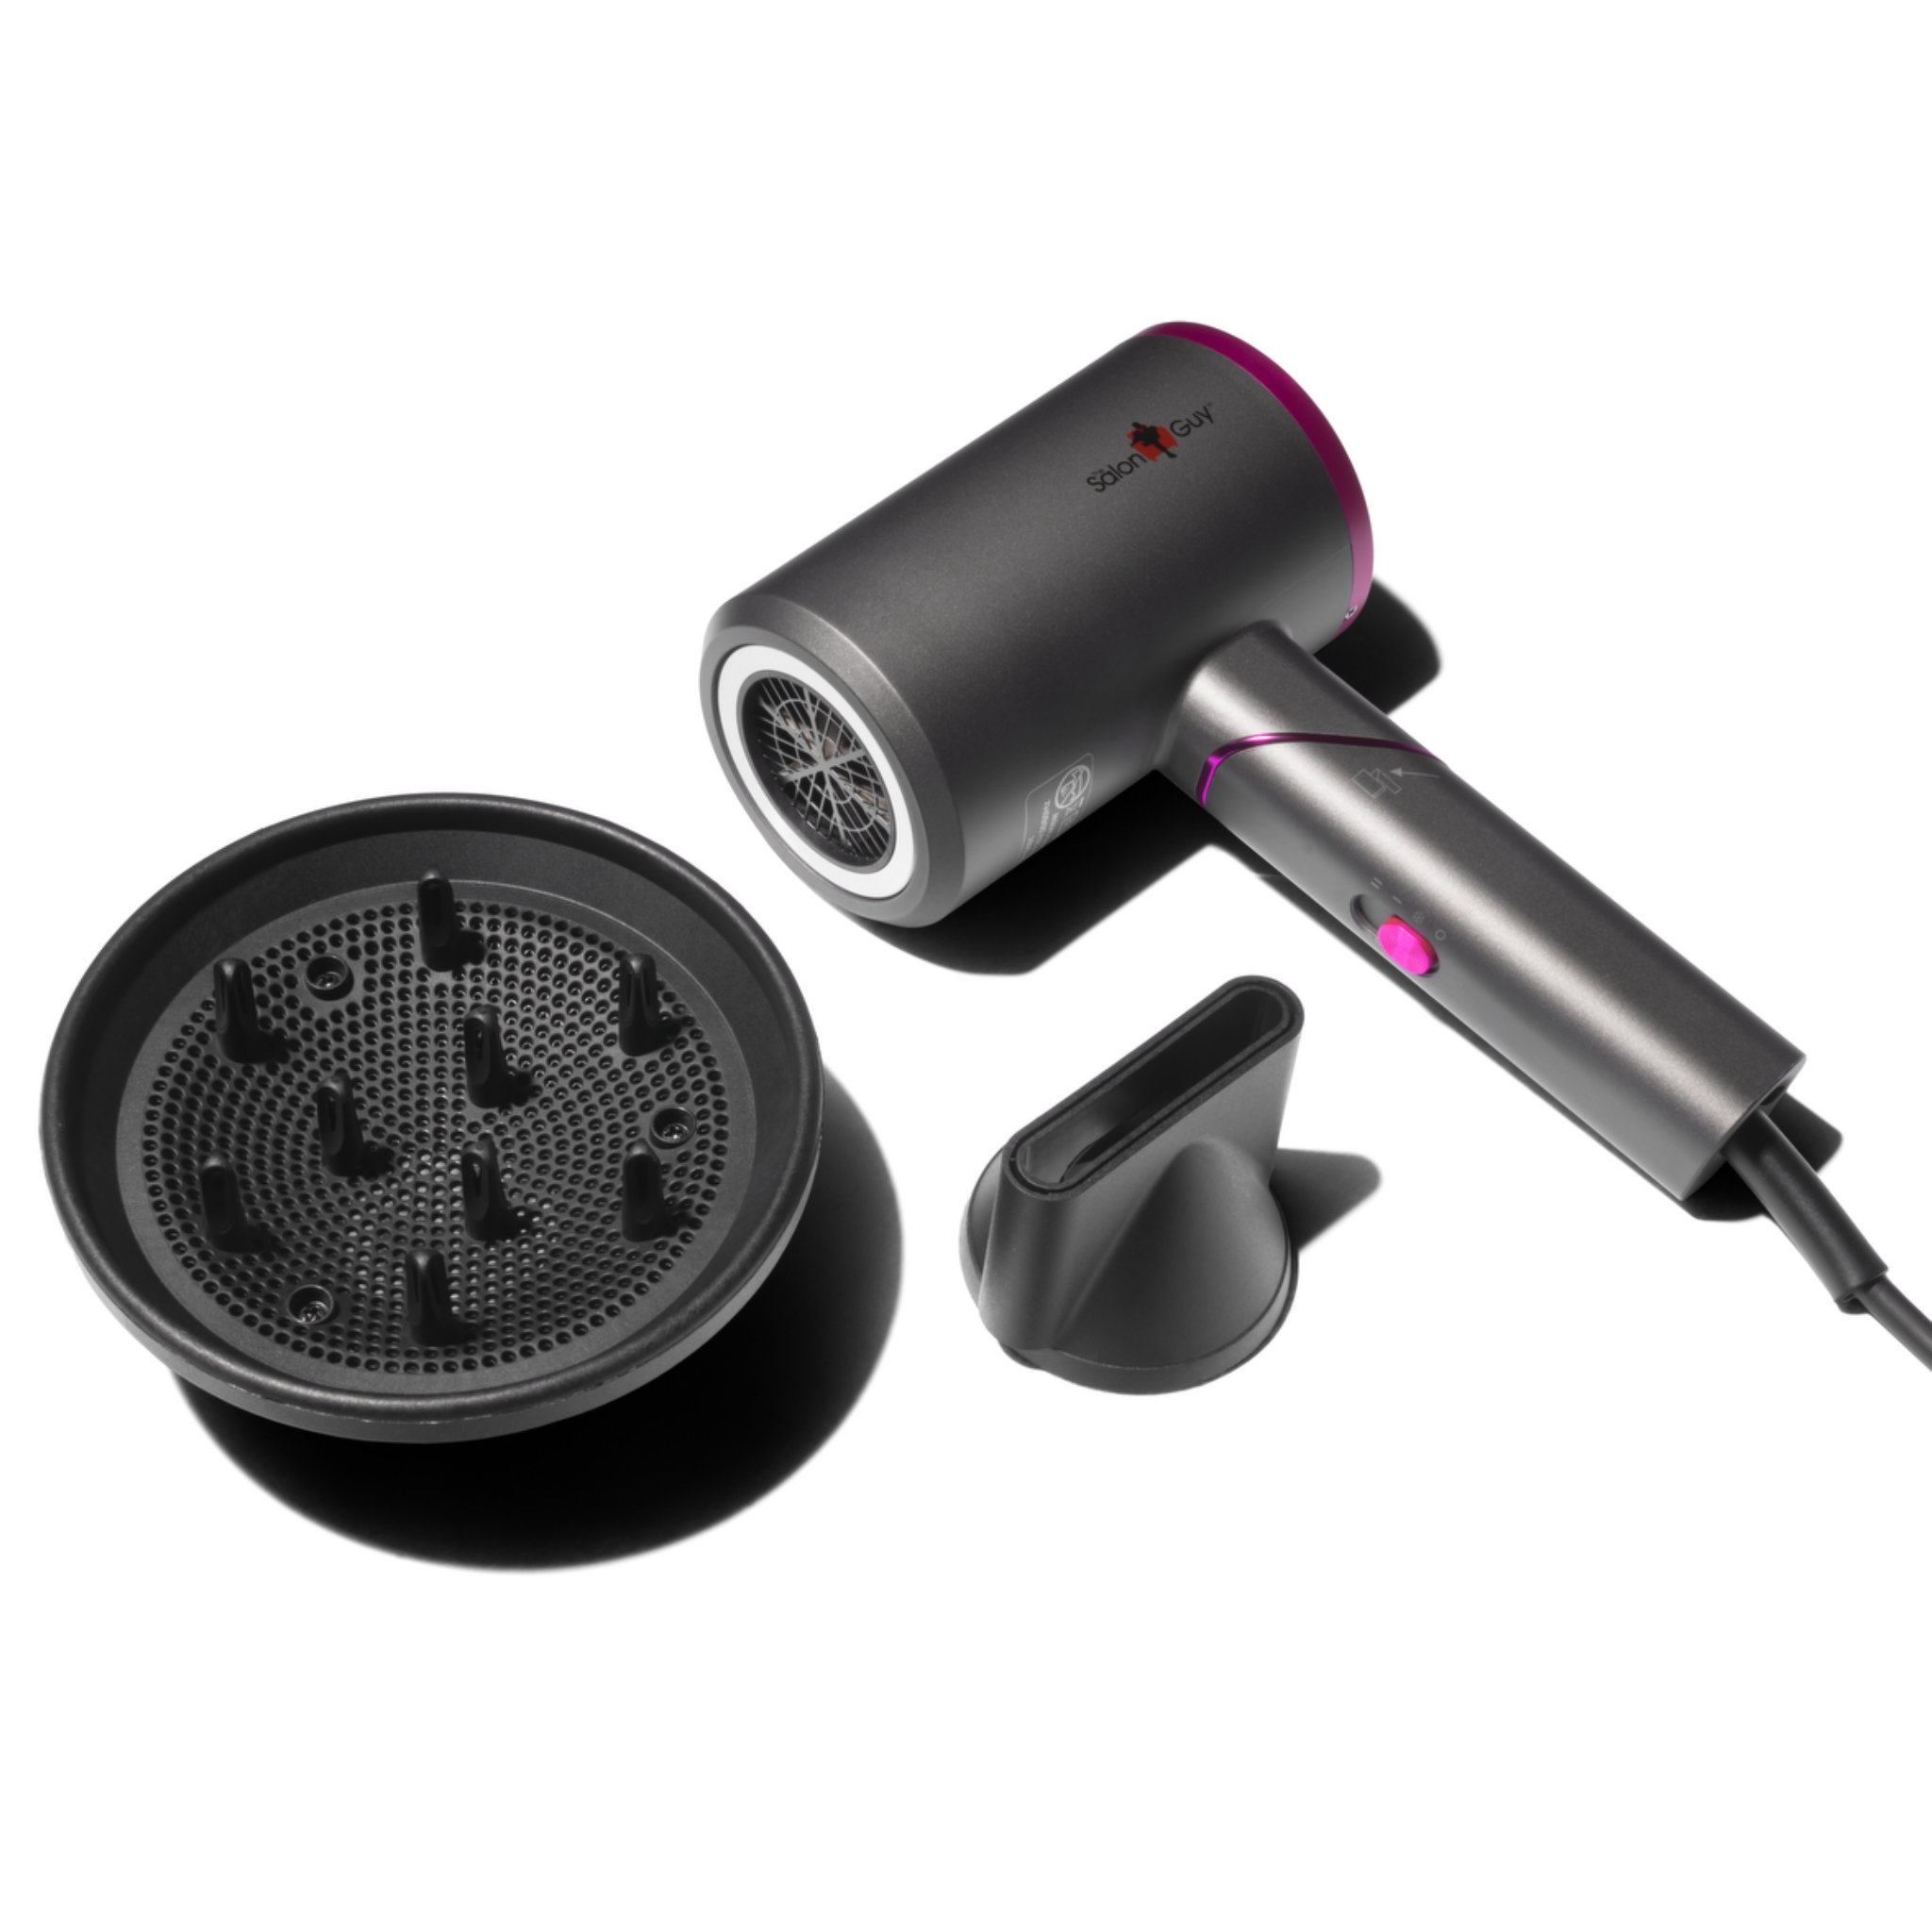 Ionic Hair Dryer - Magnetic Attachments UPDATED VERSION